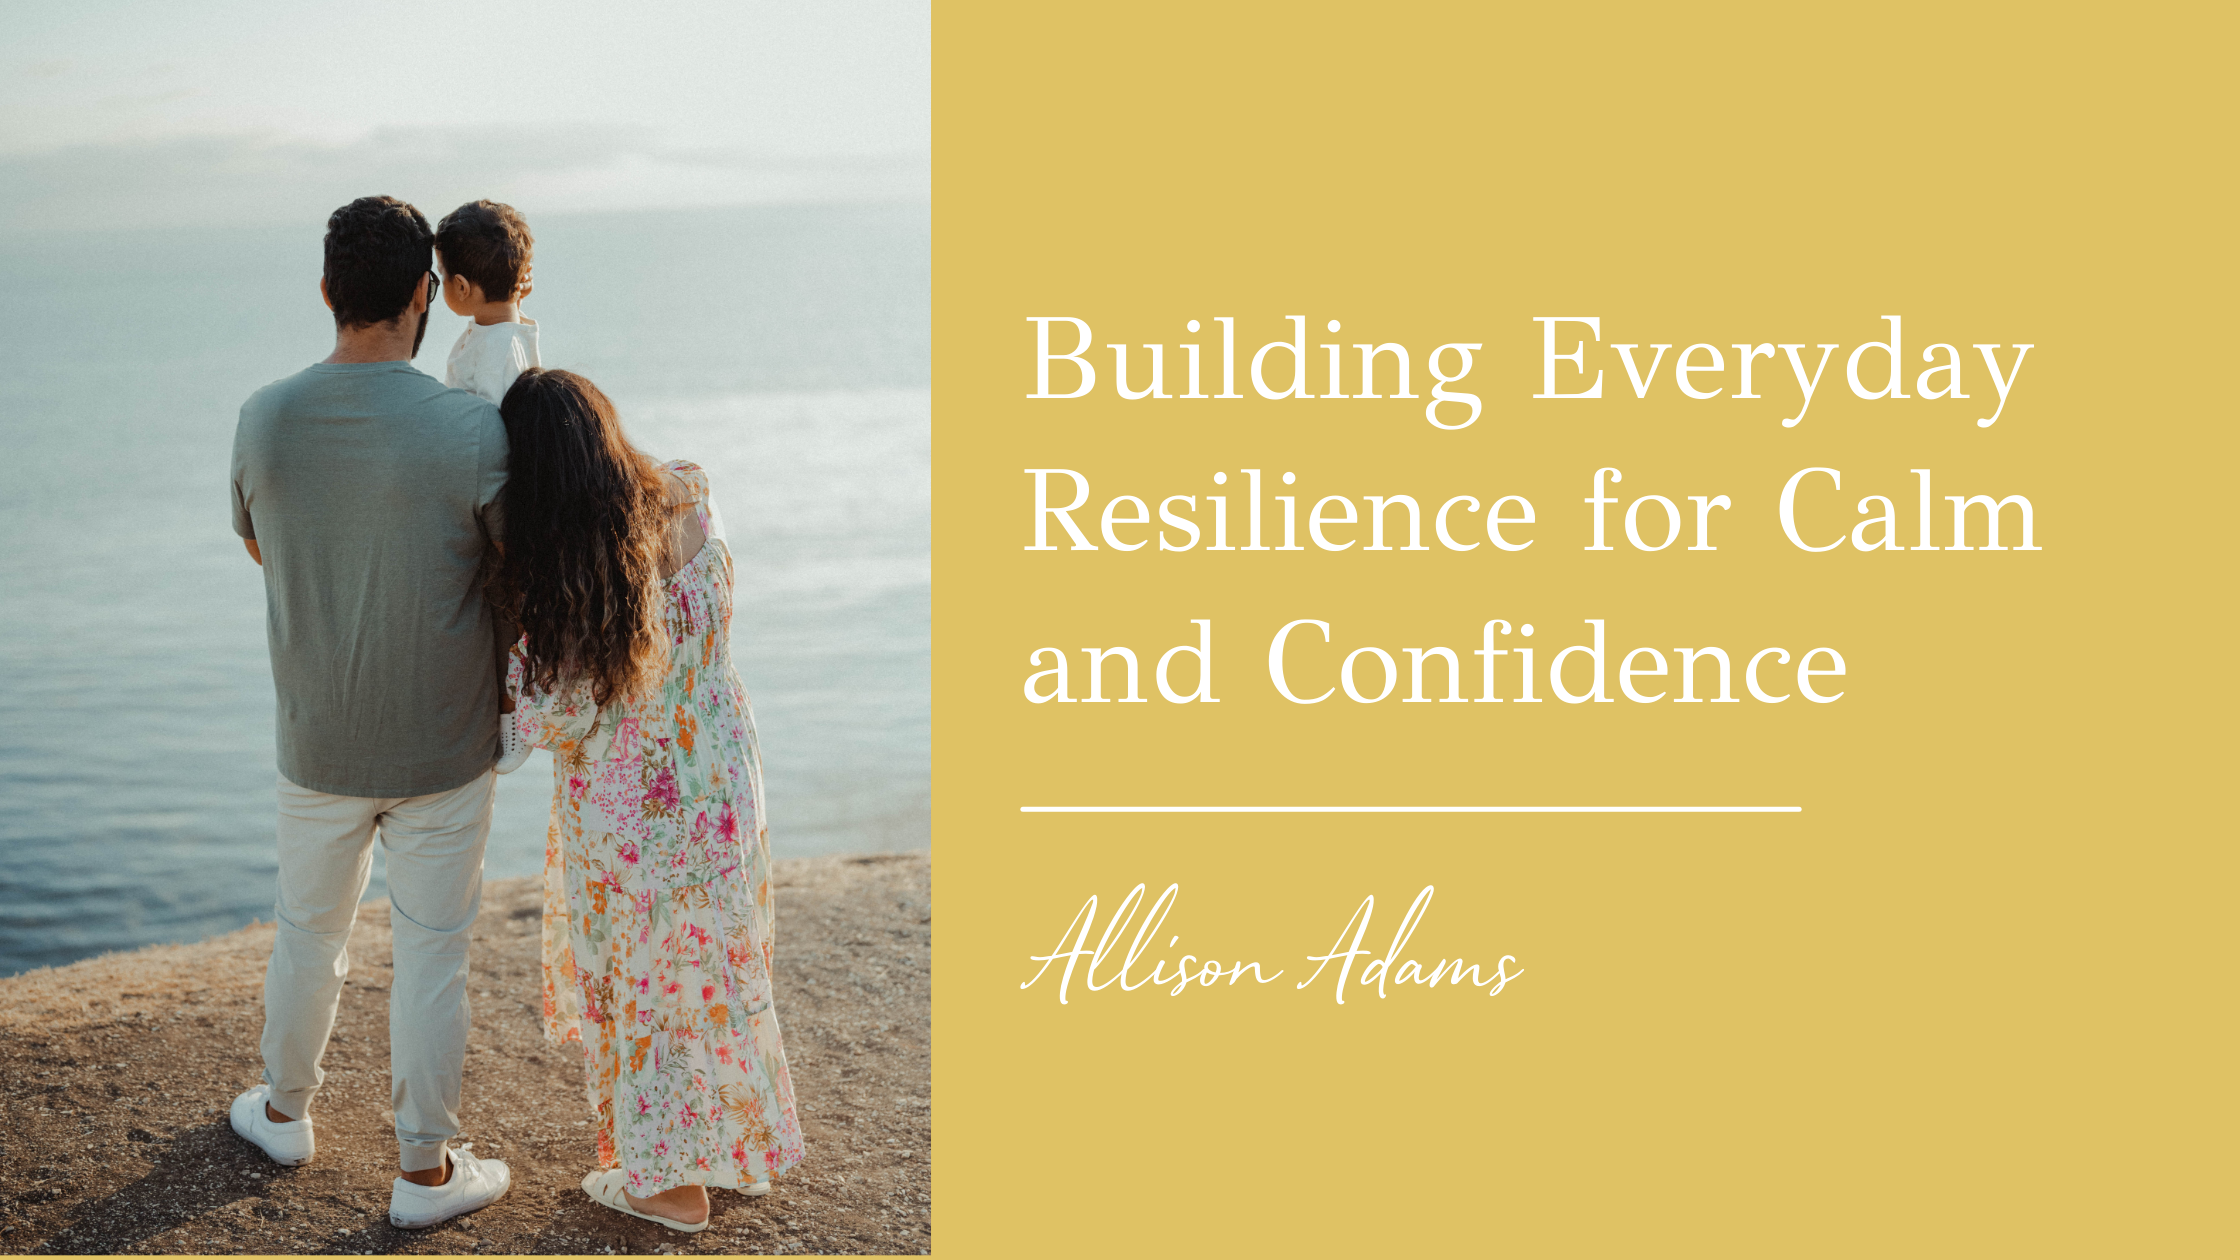 Building resilience for everyday calm and confidence improves your health and your life